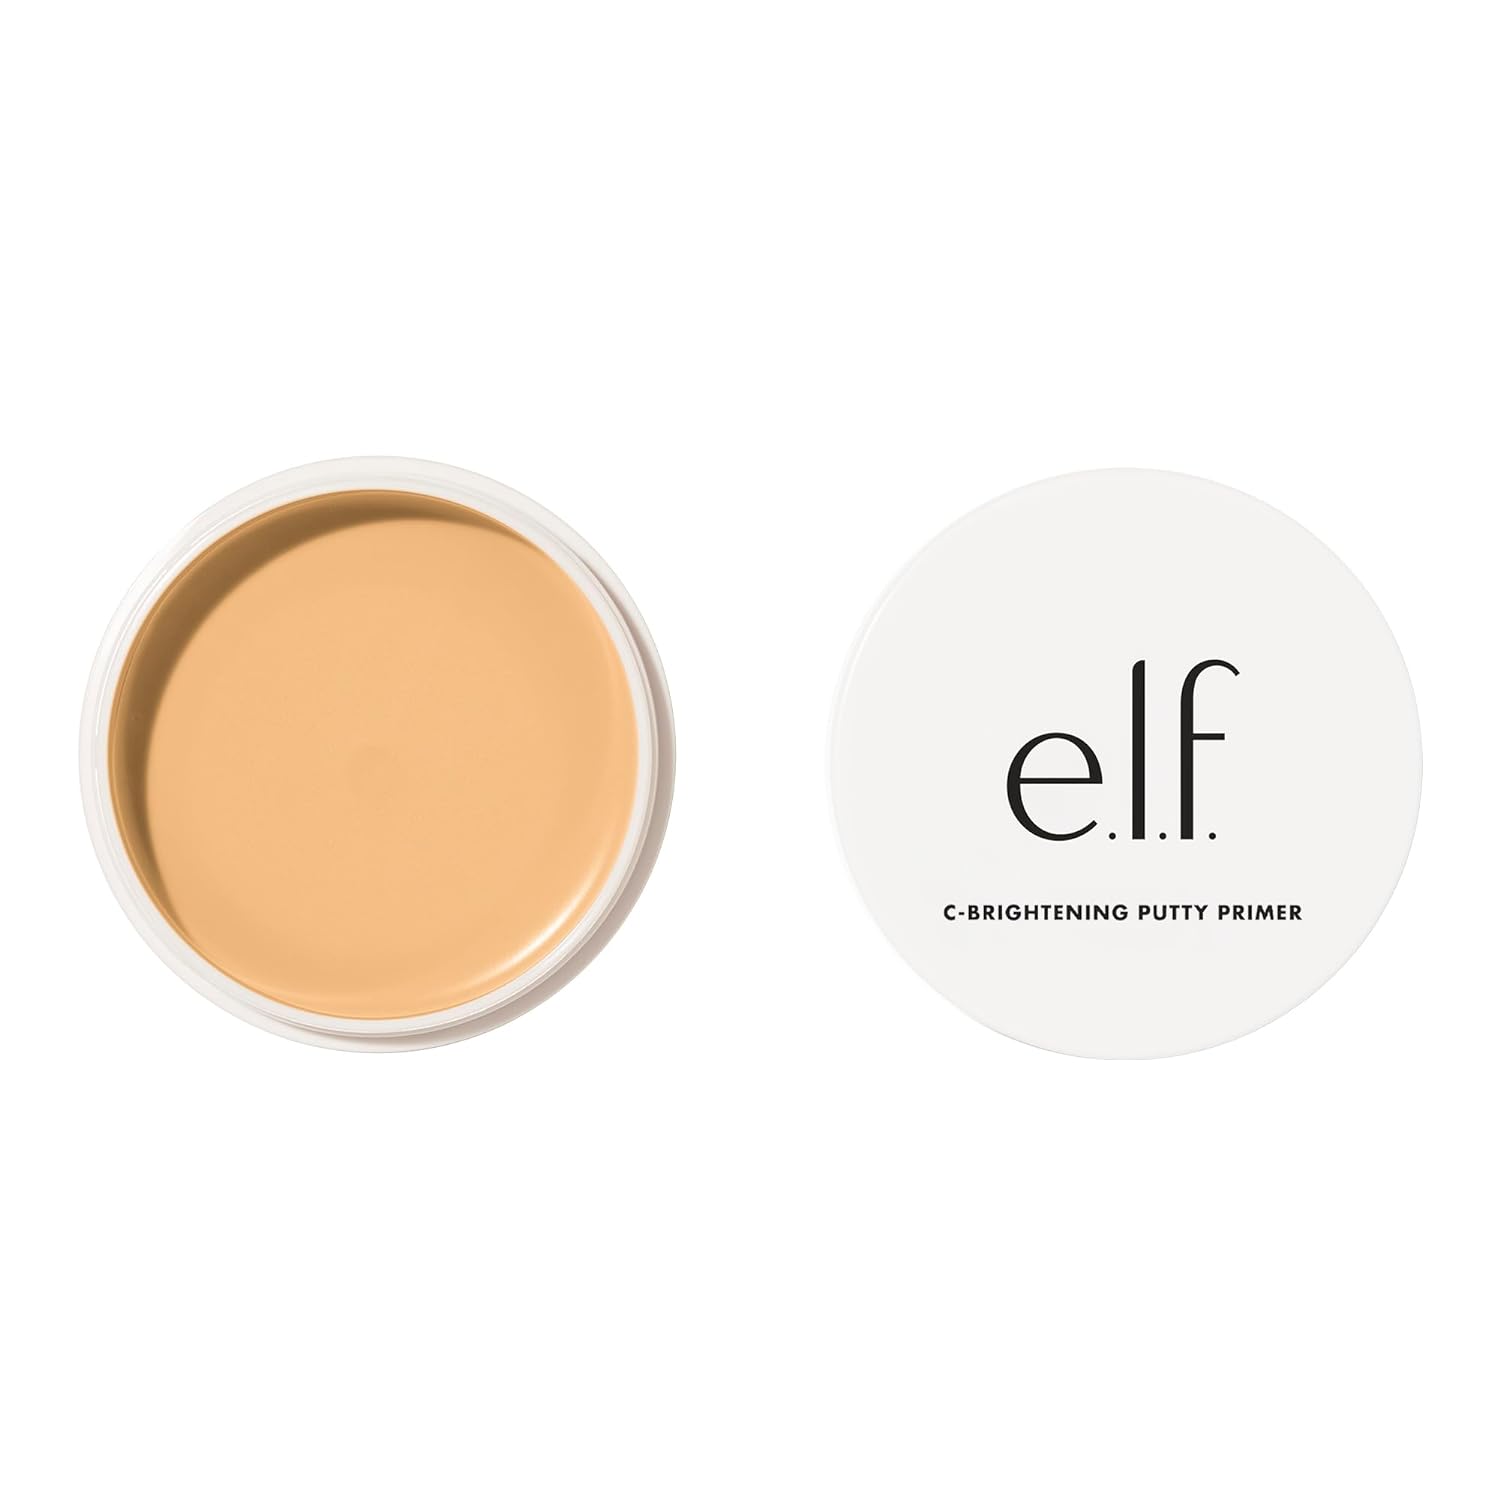 e.l.f C-Brightening Putty Primer, Makeup Primer For Brightening & Evening Out Skin Tone, Enriched With Vitamin C, Universal Sheer (Packaging May Vary)